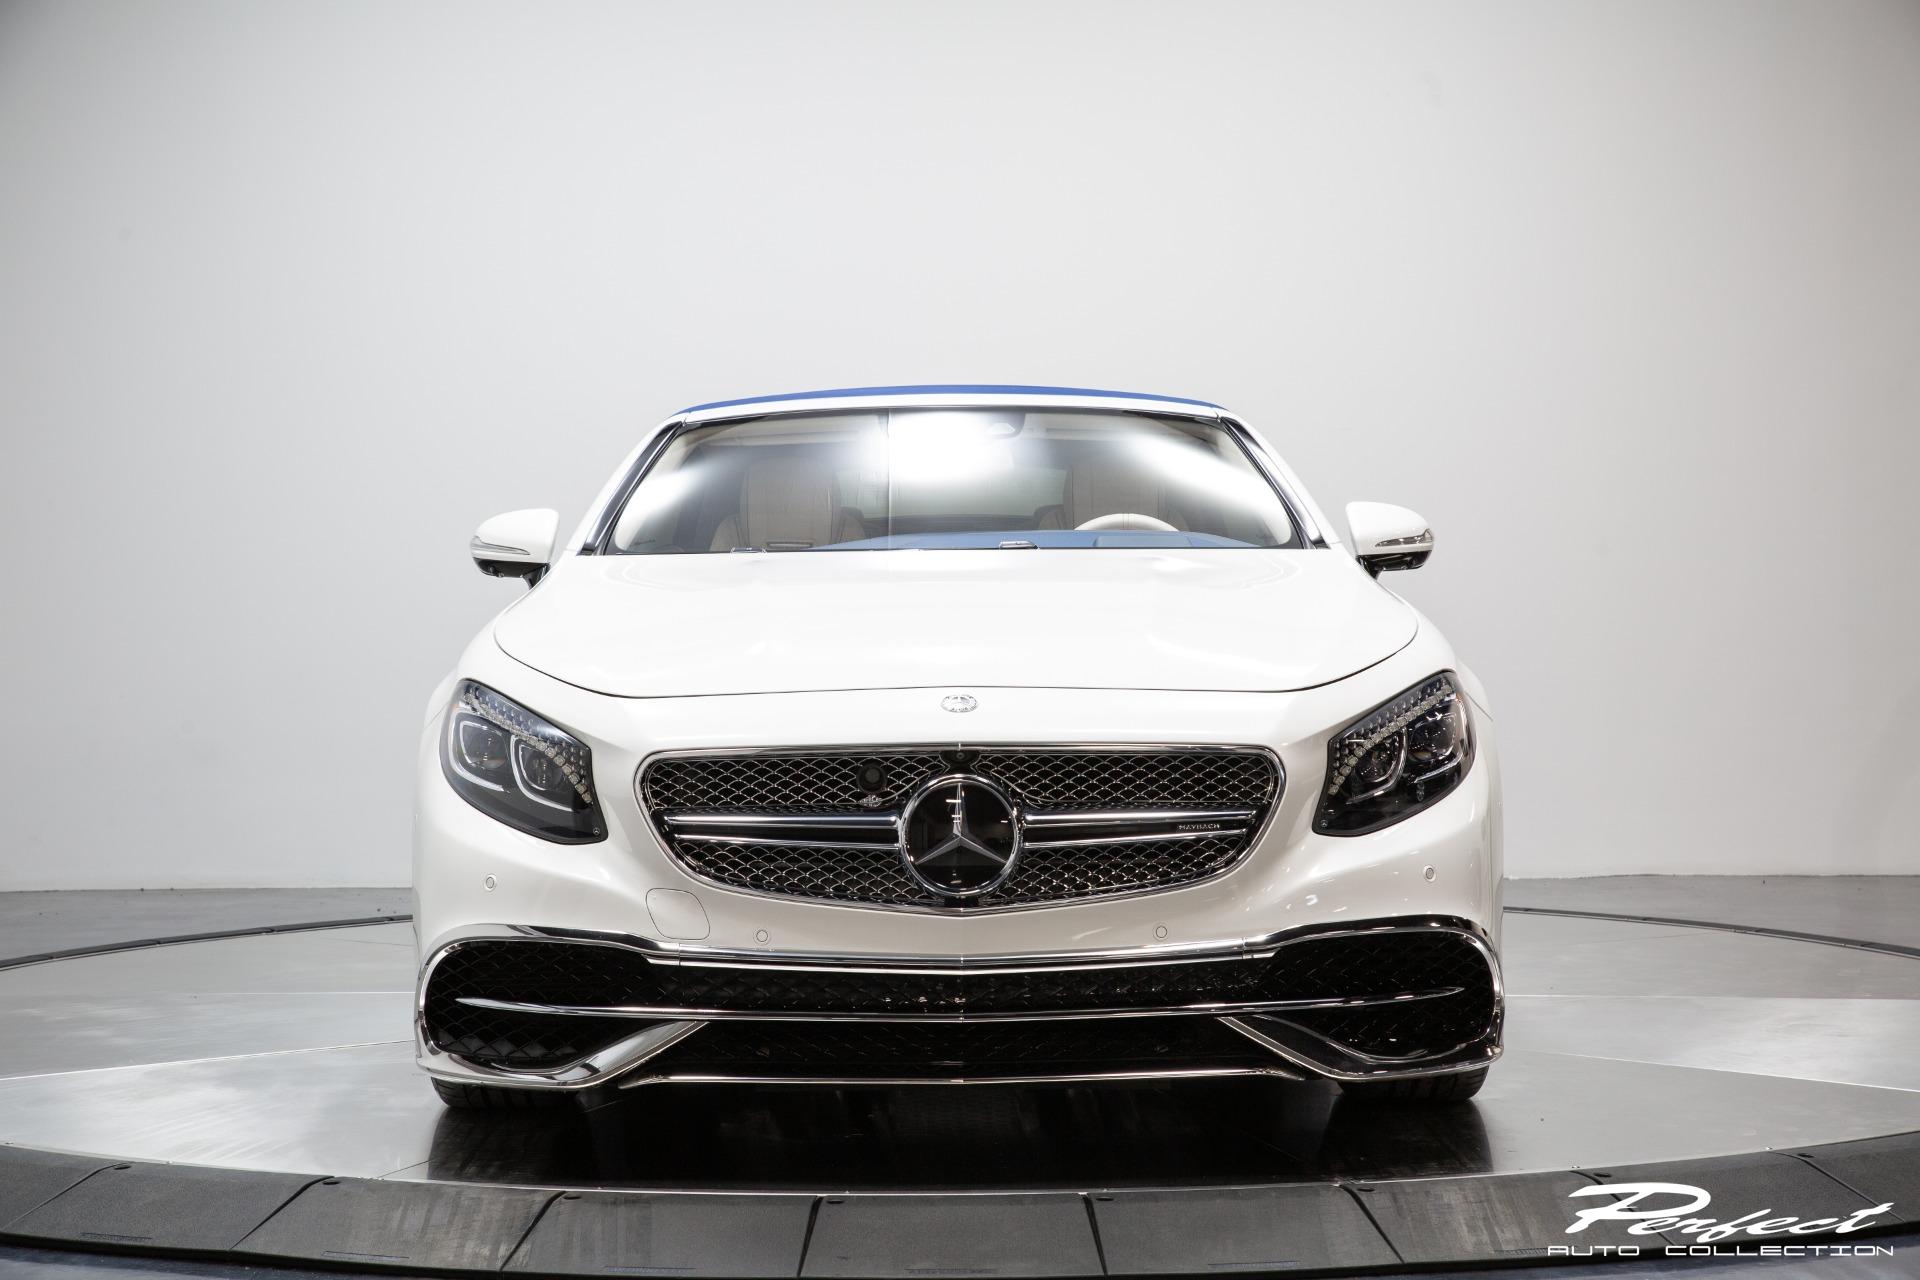 https://www.perfectautocollection.com/imagetag/580/8/l/Used-2017-Mercedes-Benz-S-Class-Maybach-S-650-Cabriolet-1600206170.jpg